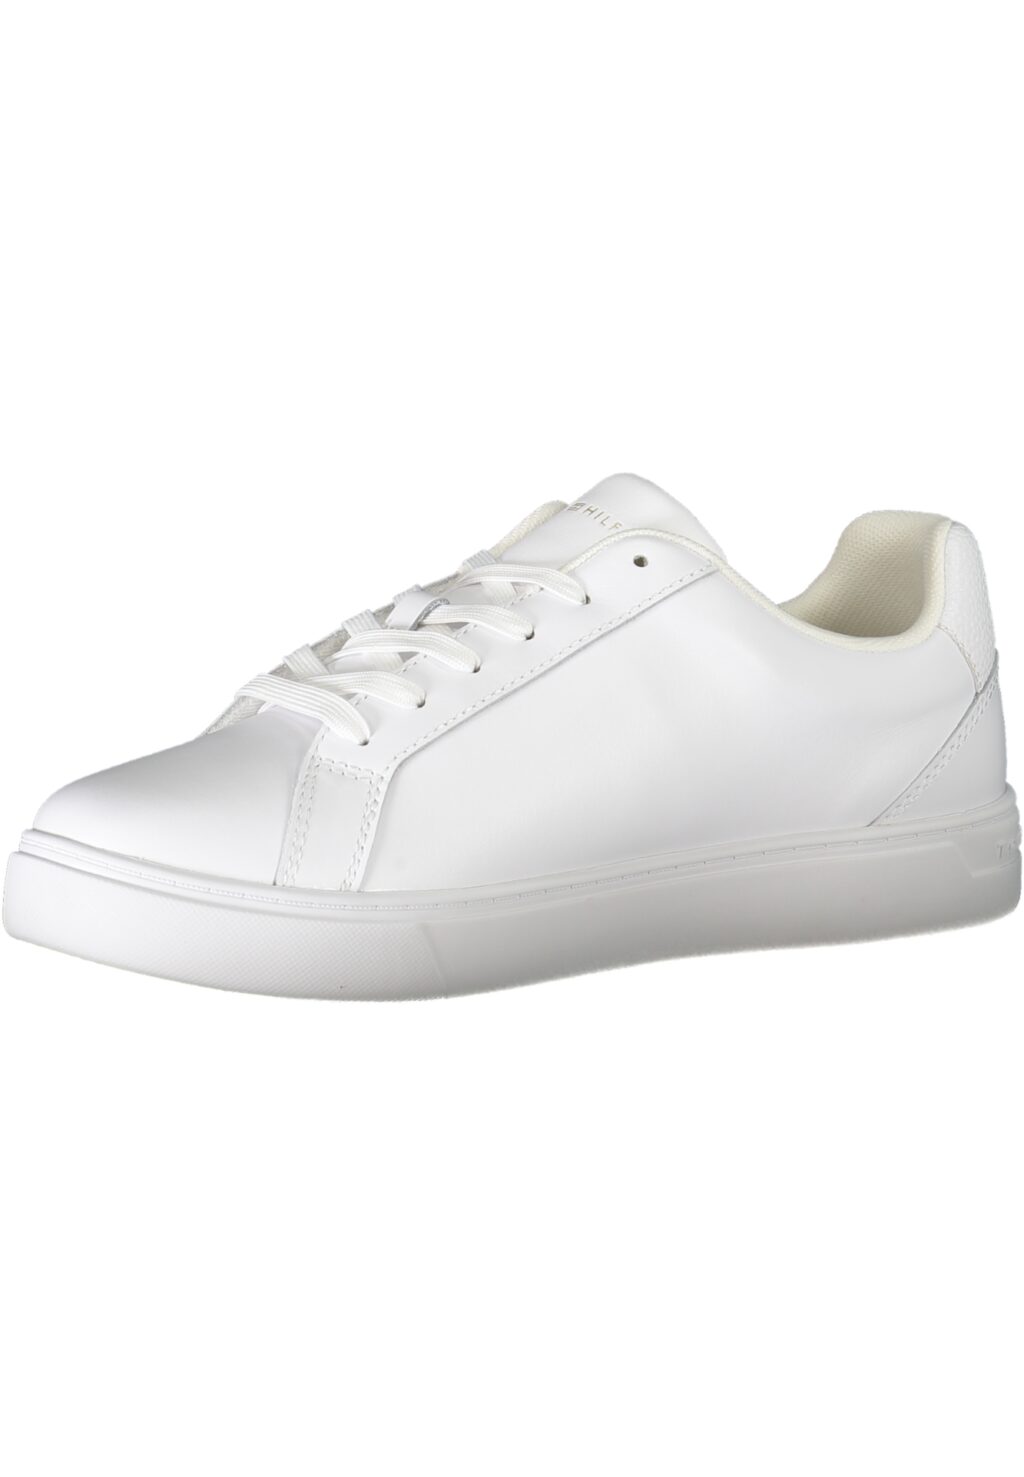 TOMMY HILFIGER WHITE WOMEN'S SPORTS SHOES FW0FW08072_BIYBS